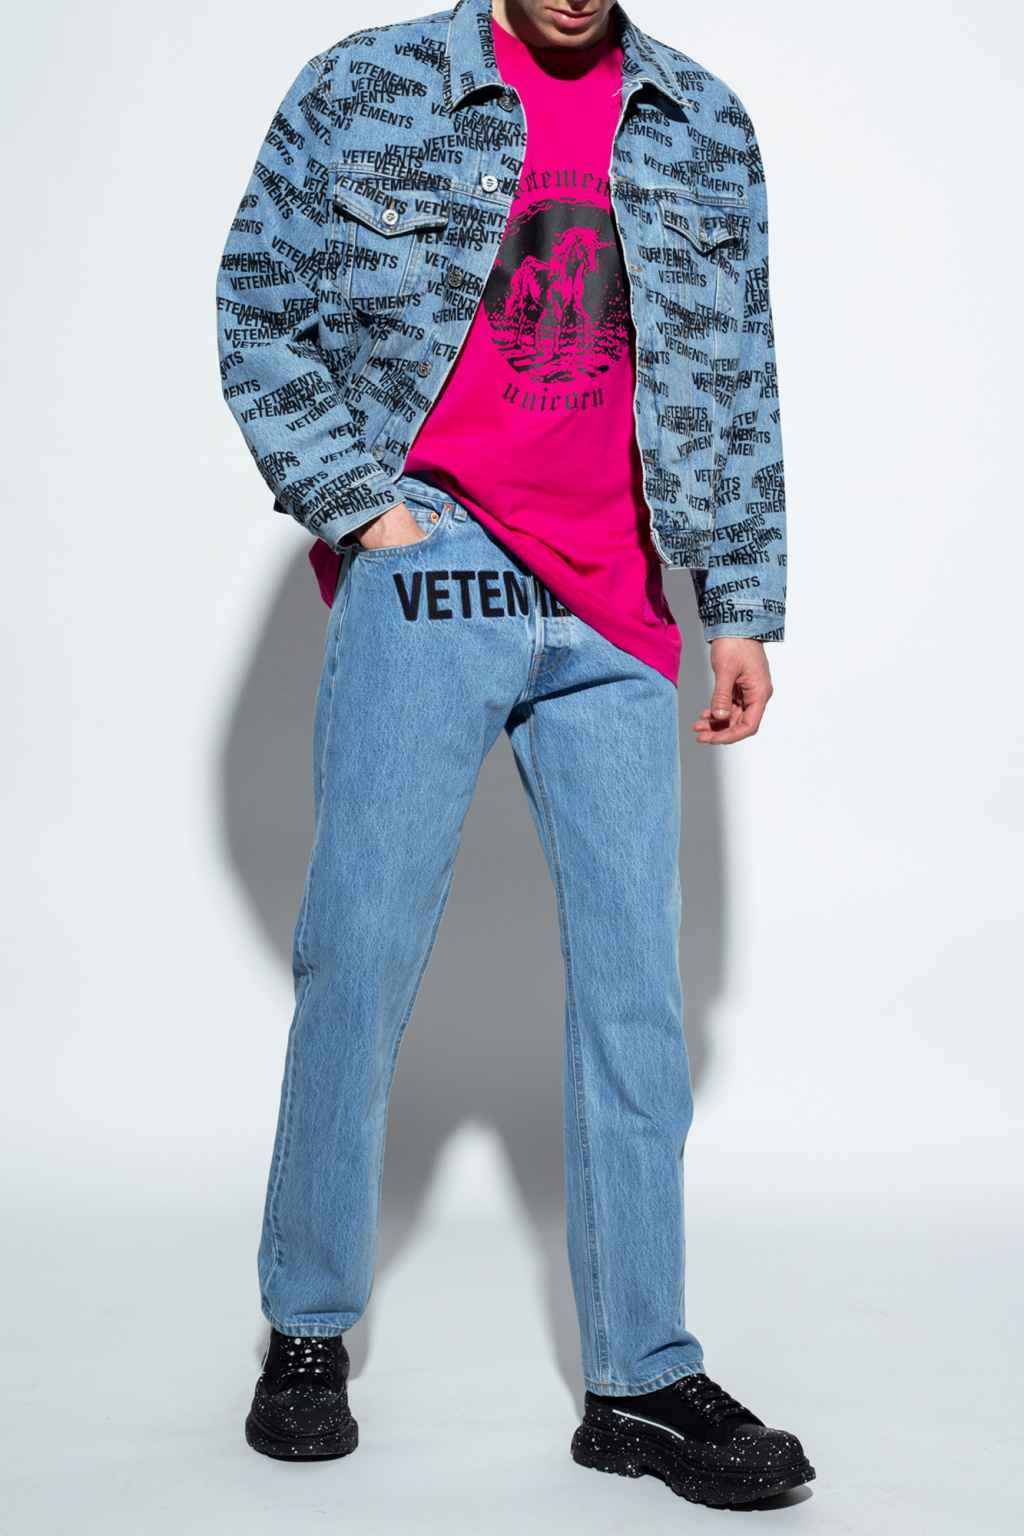 VETEMENTS the ™ Robbiee Shirt elevates your look perfectly